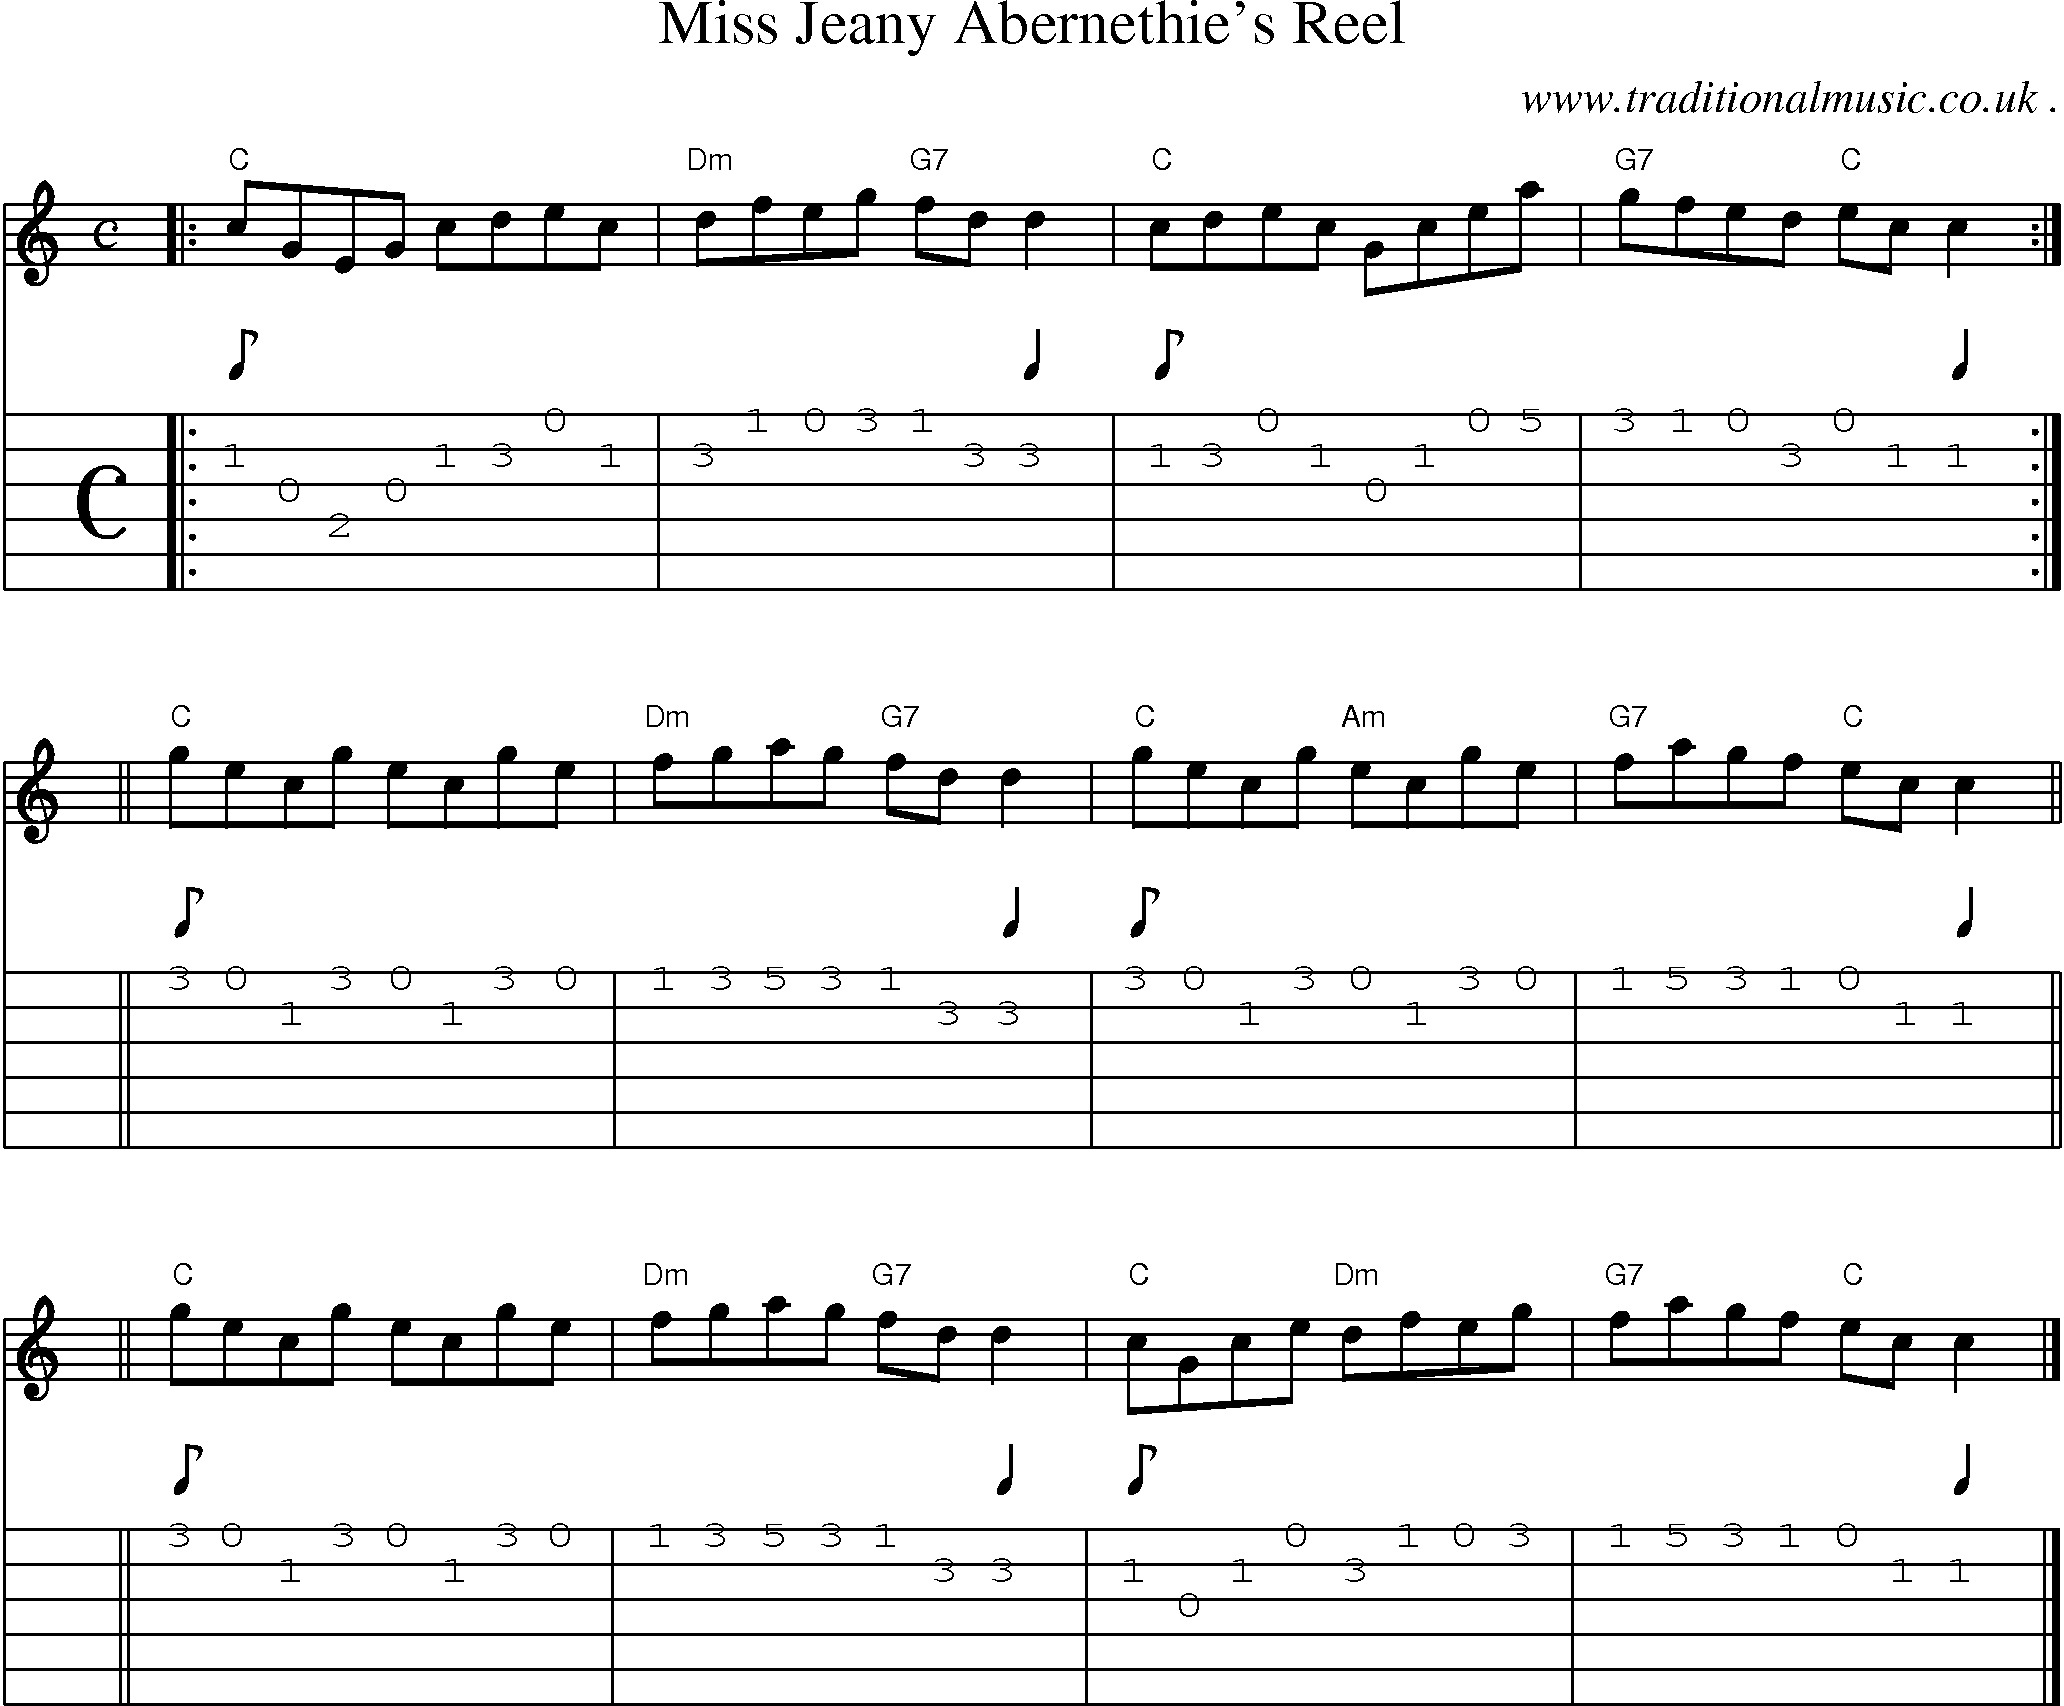 Sheet-music  score, Chords and Guitar Tabs for Miss Jeany Abernethies Reel